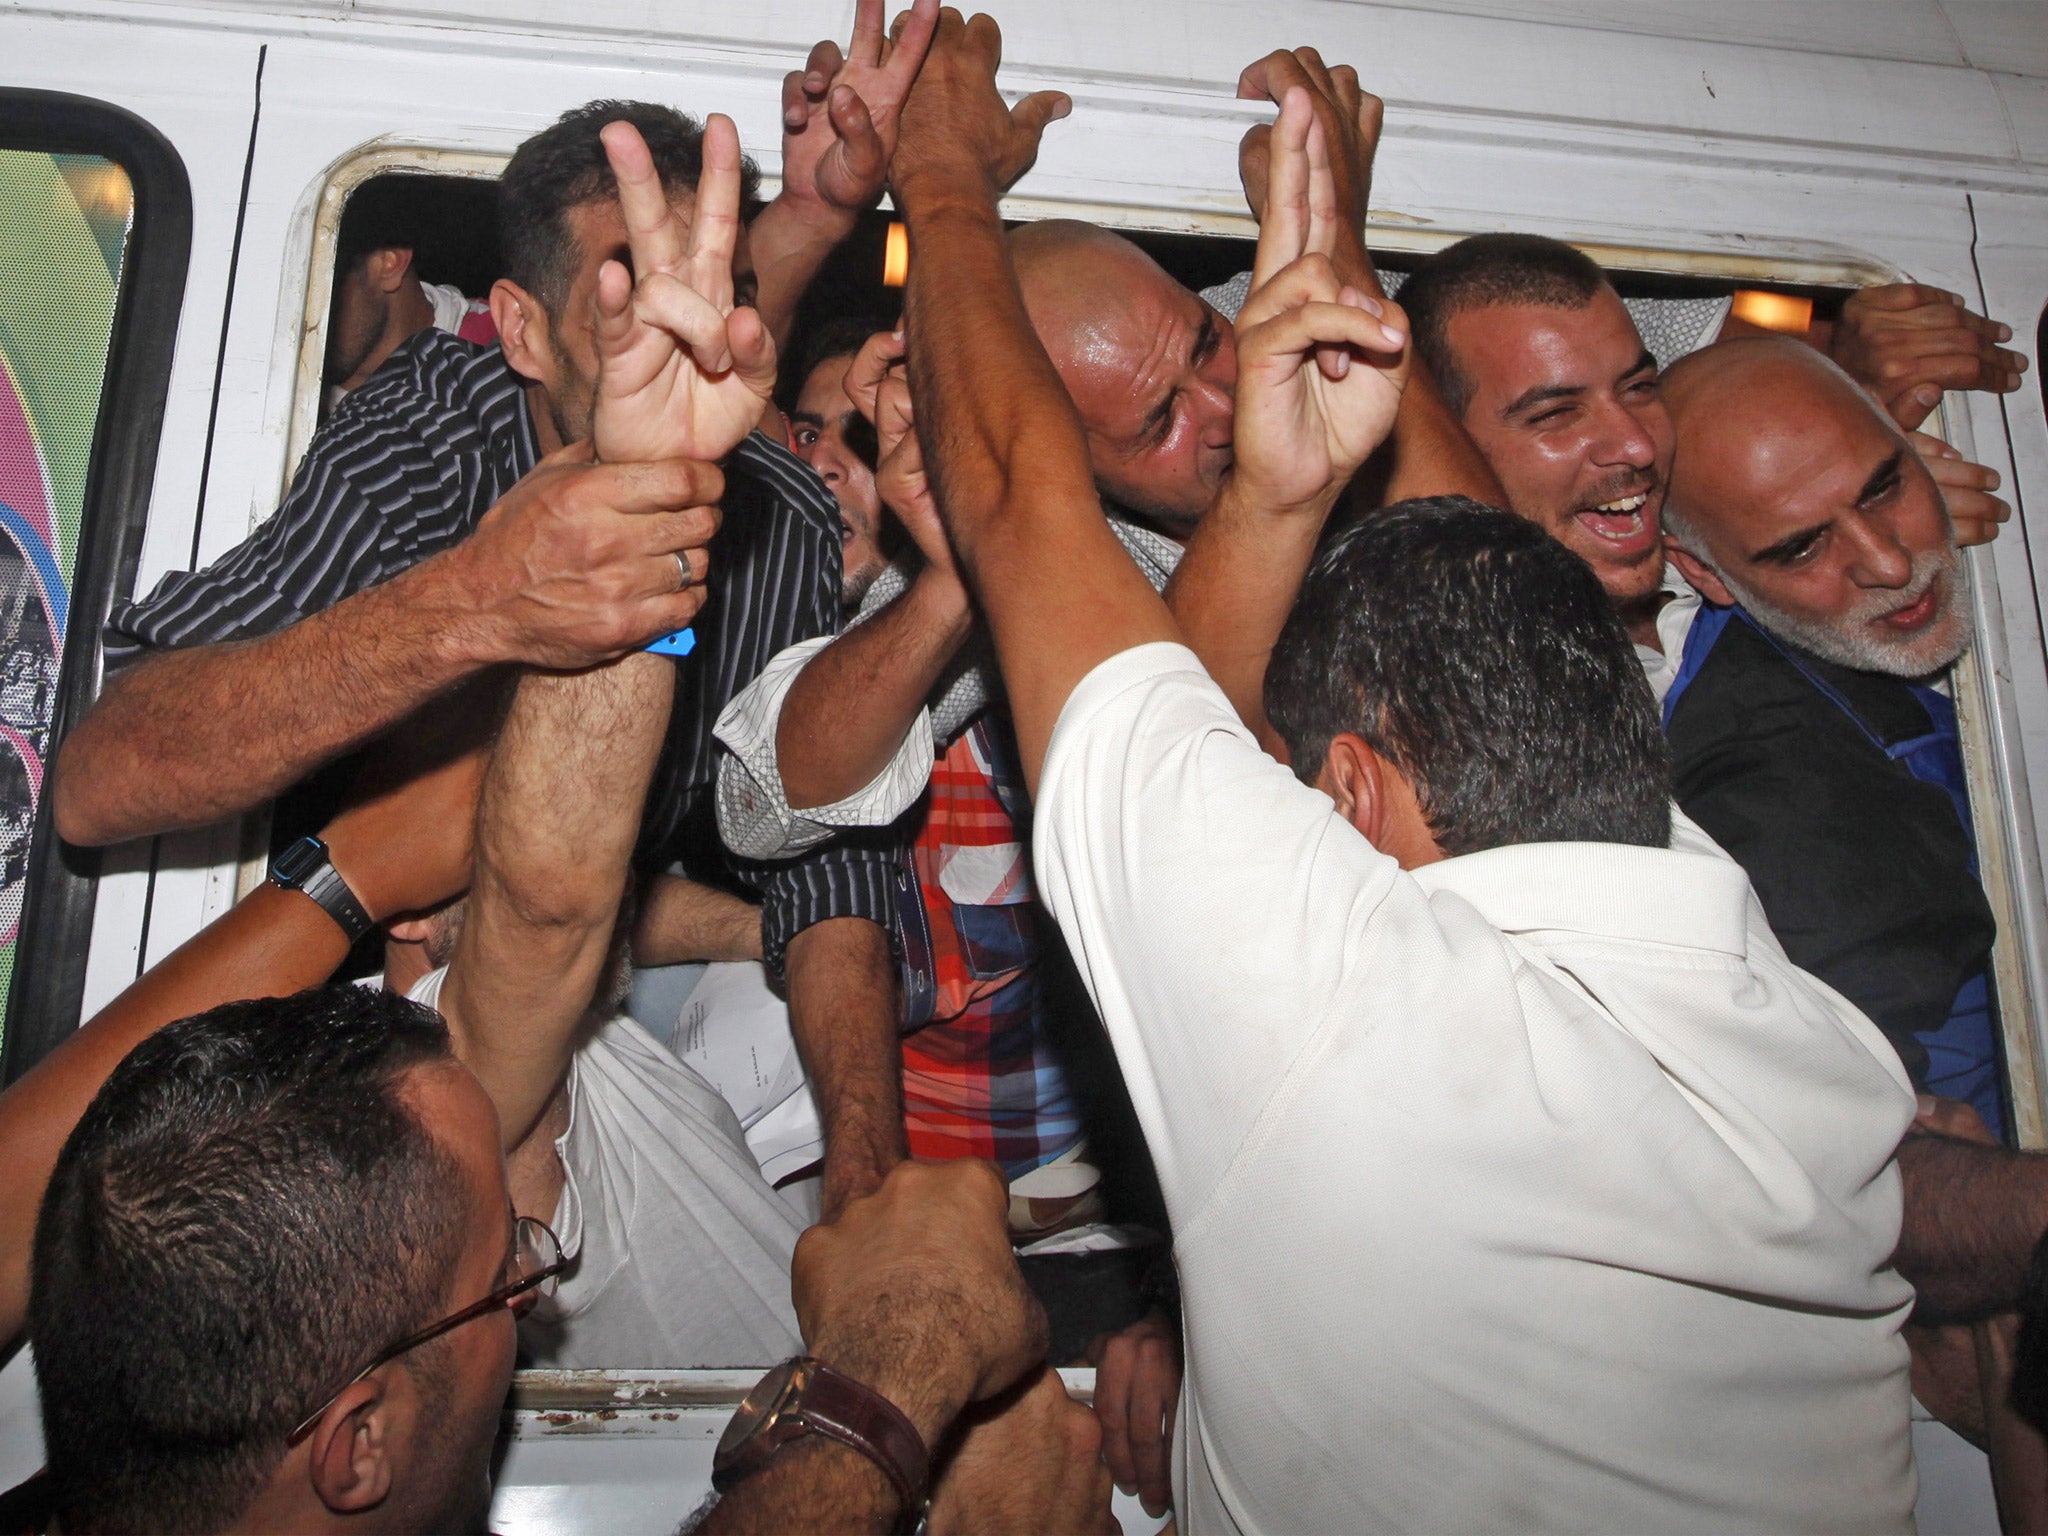 Relatives jump to a vehicle carrying the freed men